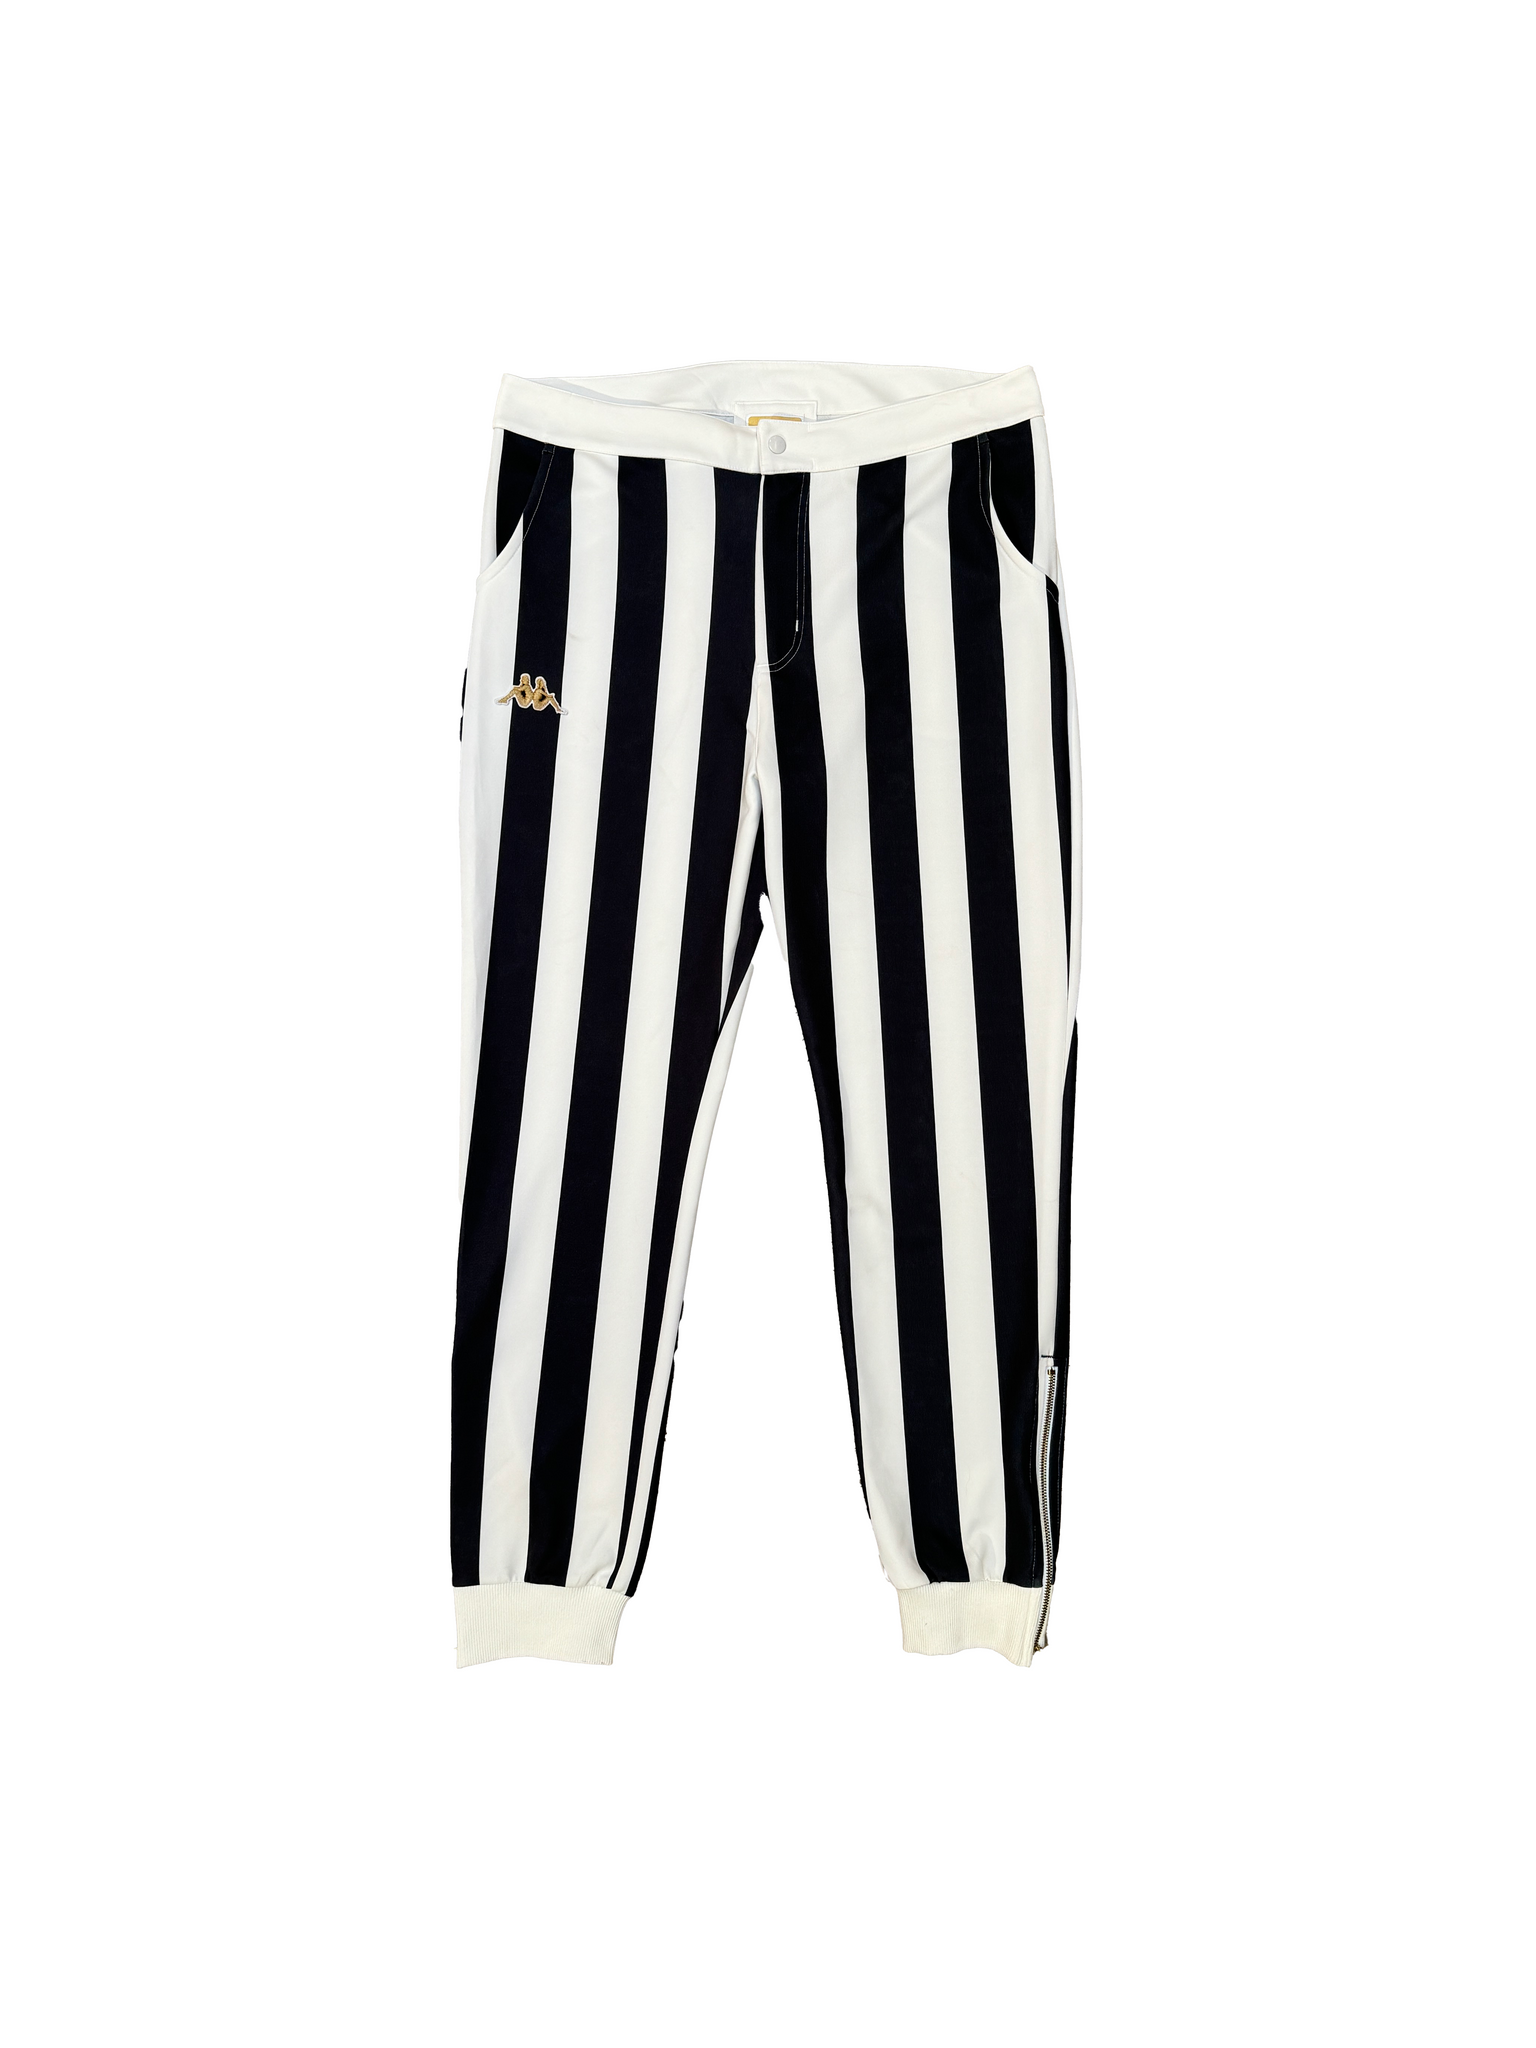 KP AUTHENTIC STRIPES TROUSERS